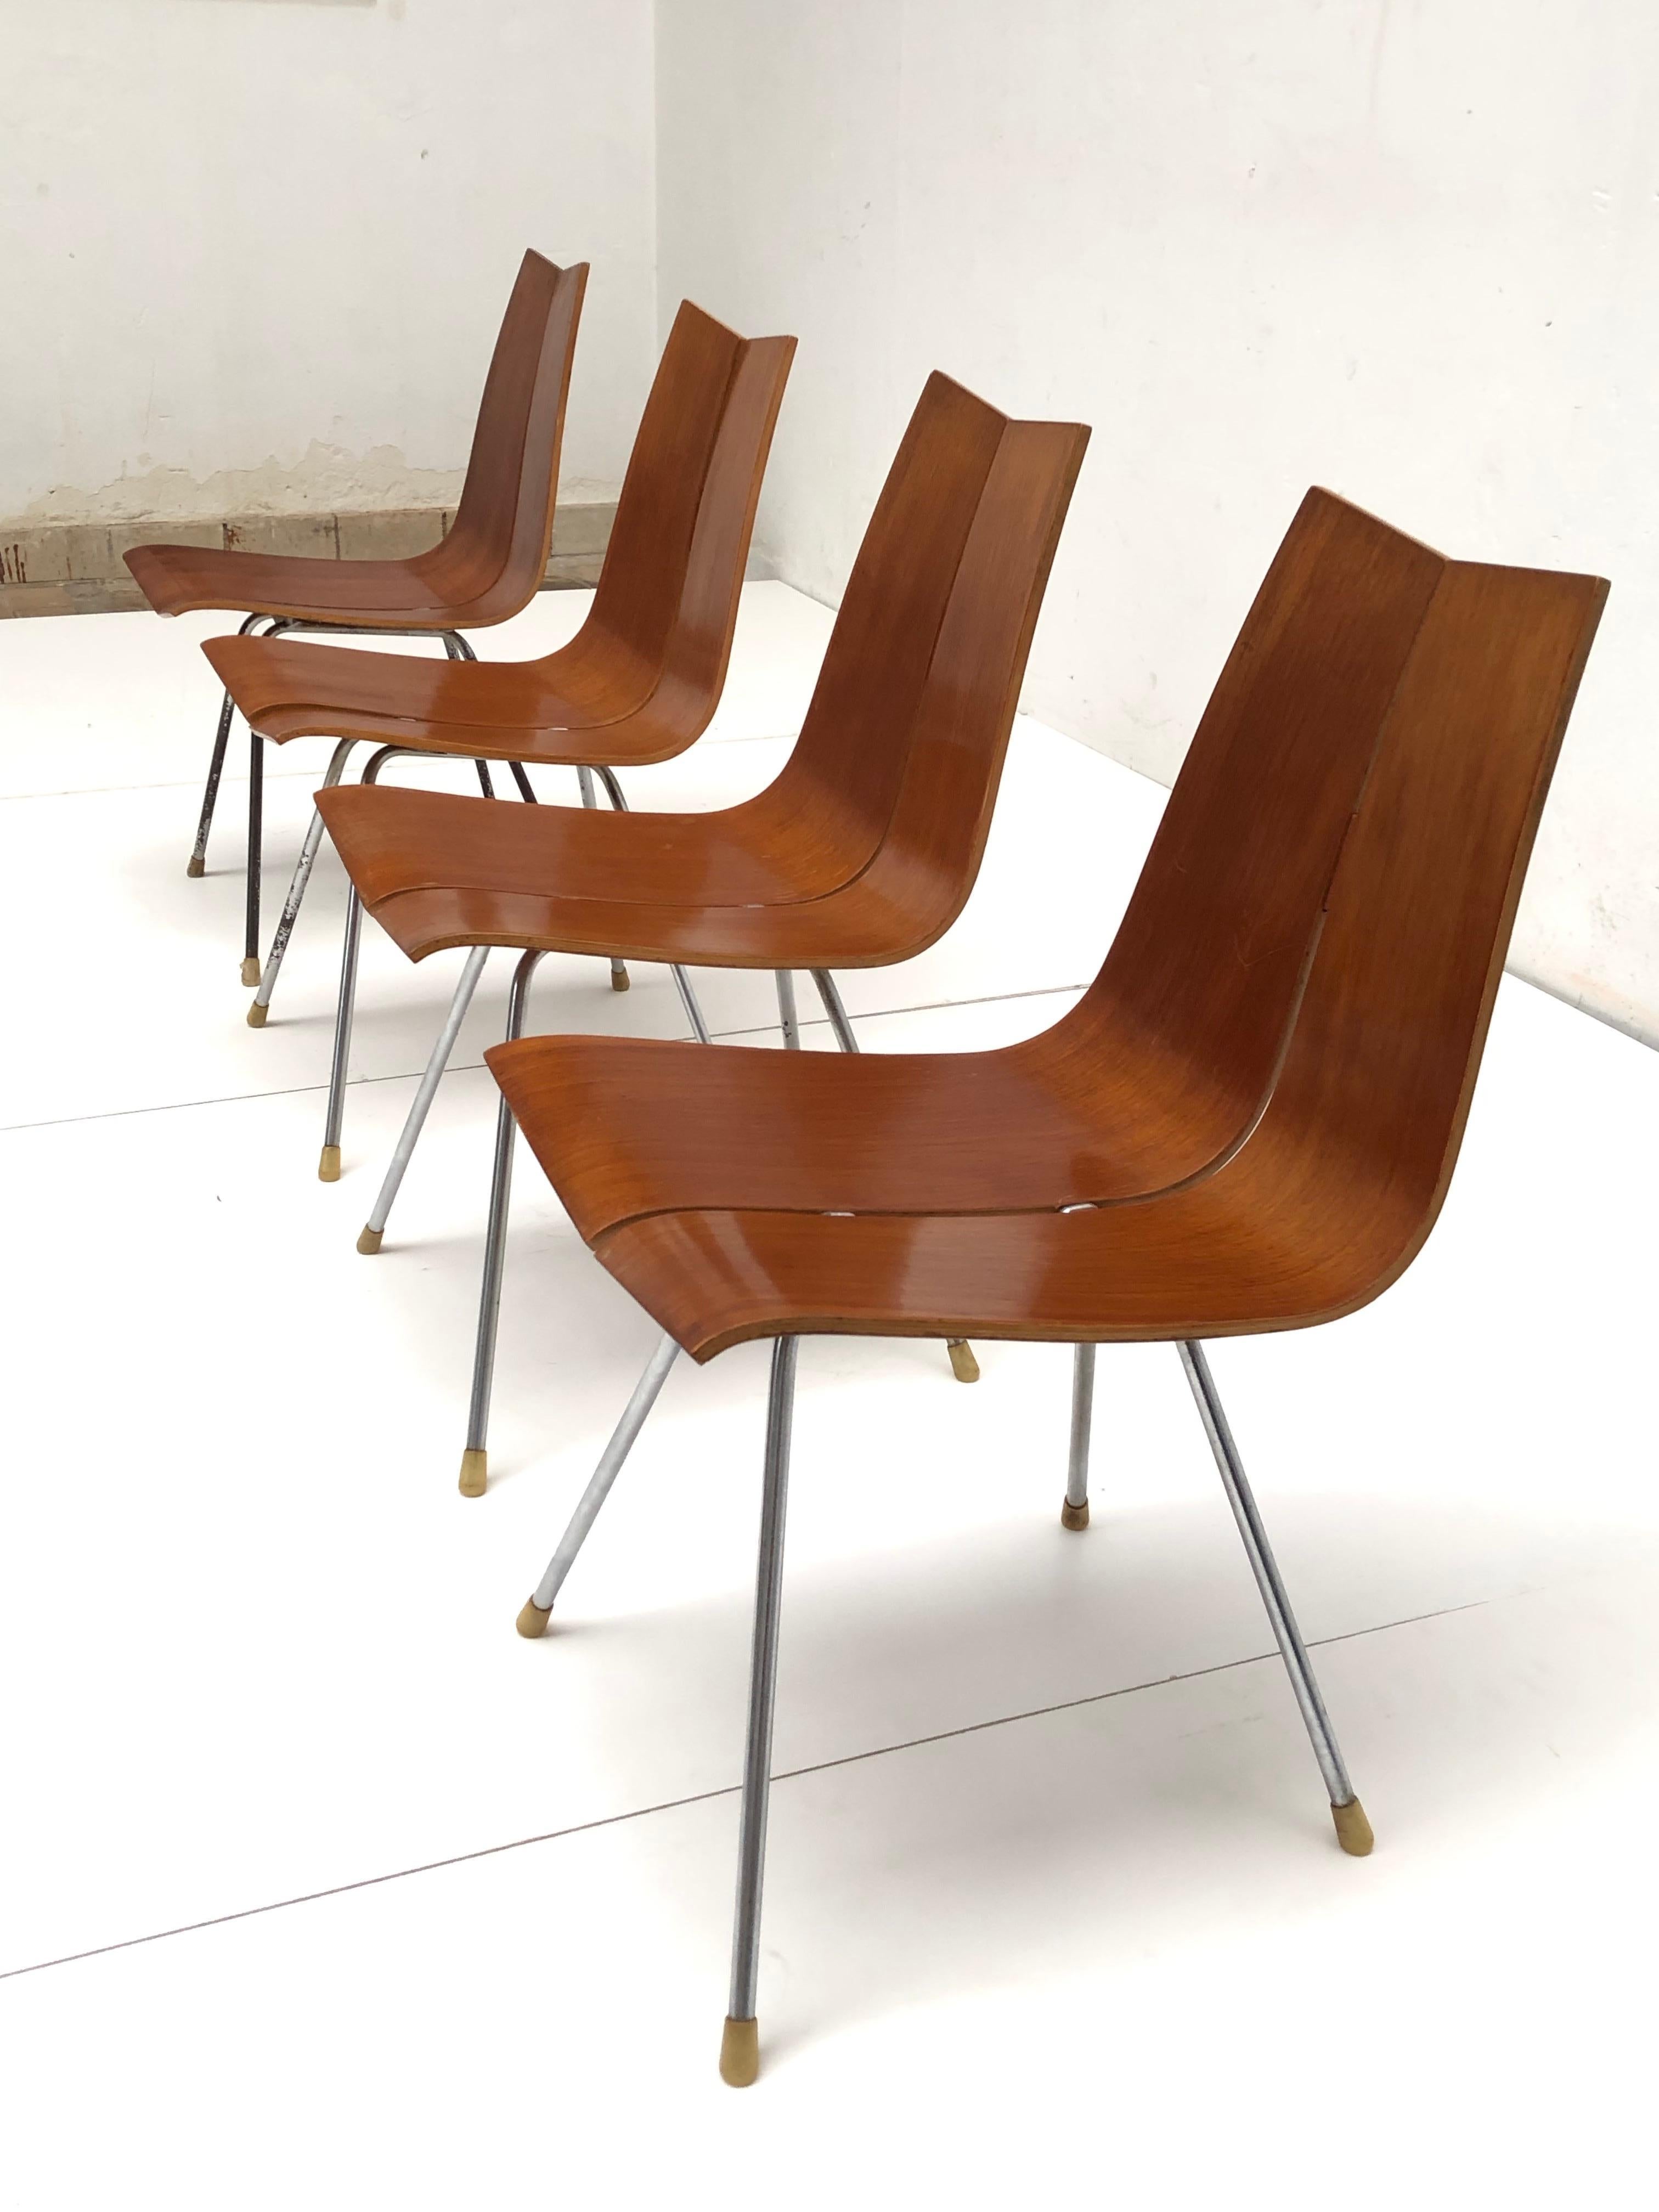 Plated Swiss Design Set of 4 Hans Bellmann 'GA' Dining Chairs for Horgen Glarus 1955 For Sale